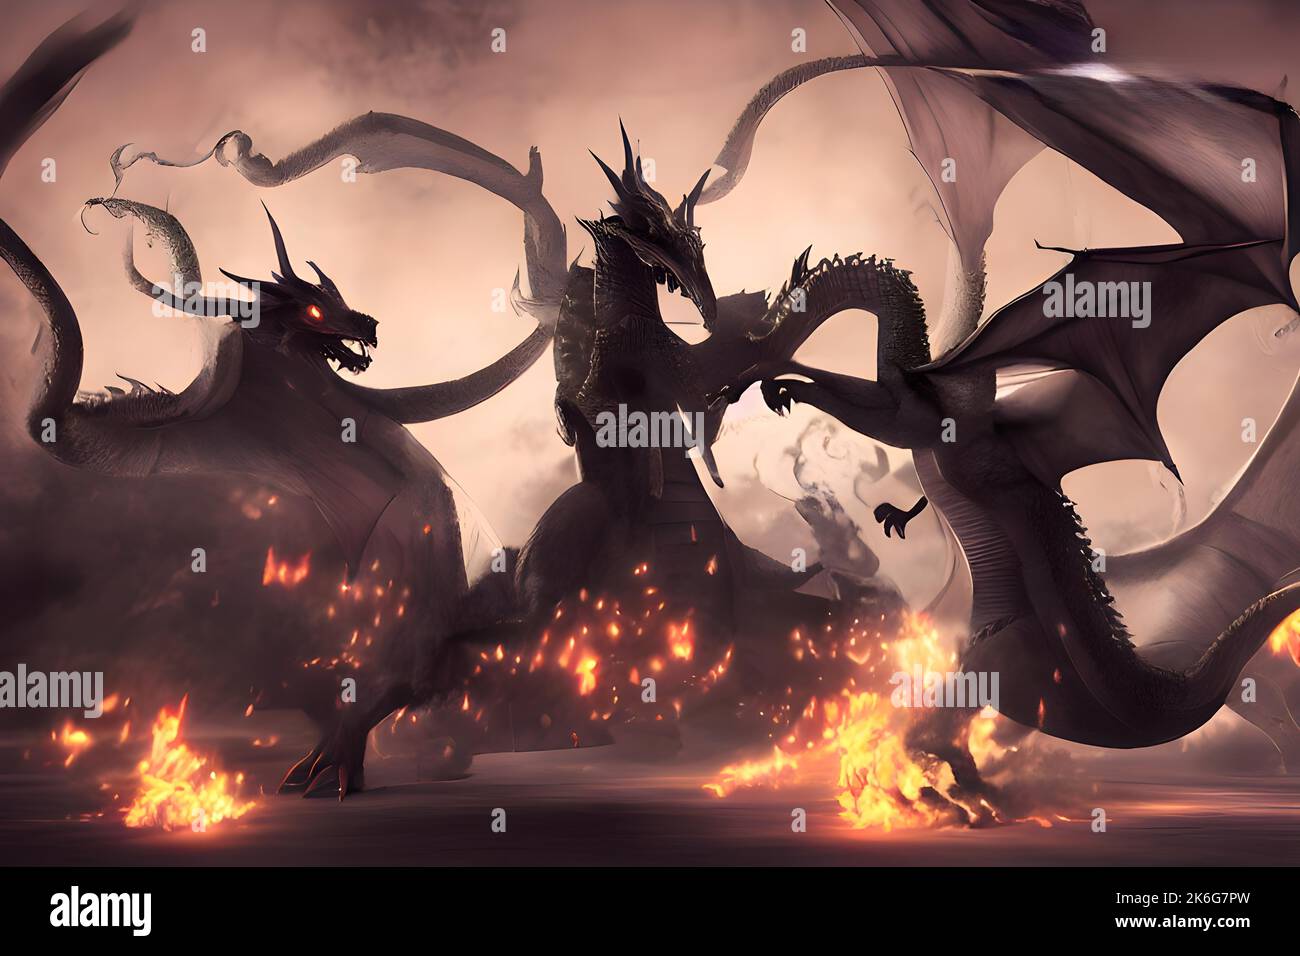 A dramatic illustration of the mighty dragons fighting Stock Photo